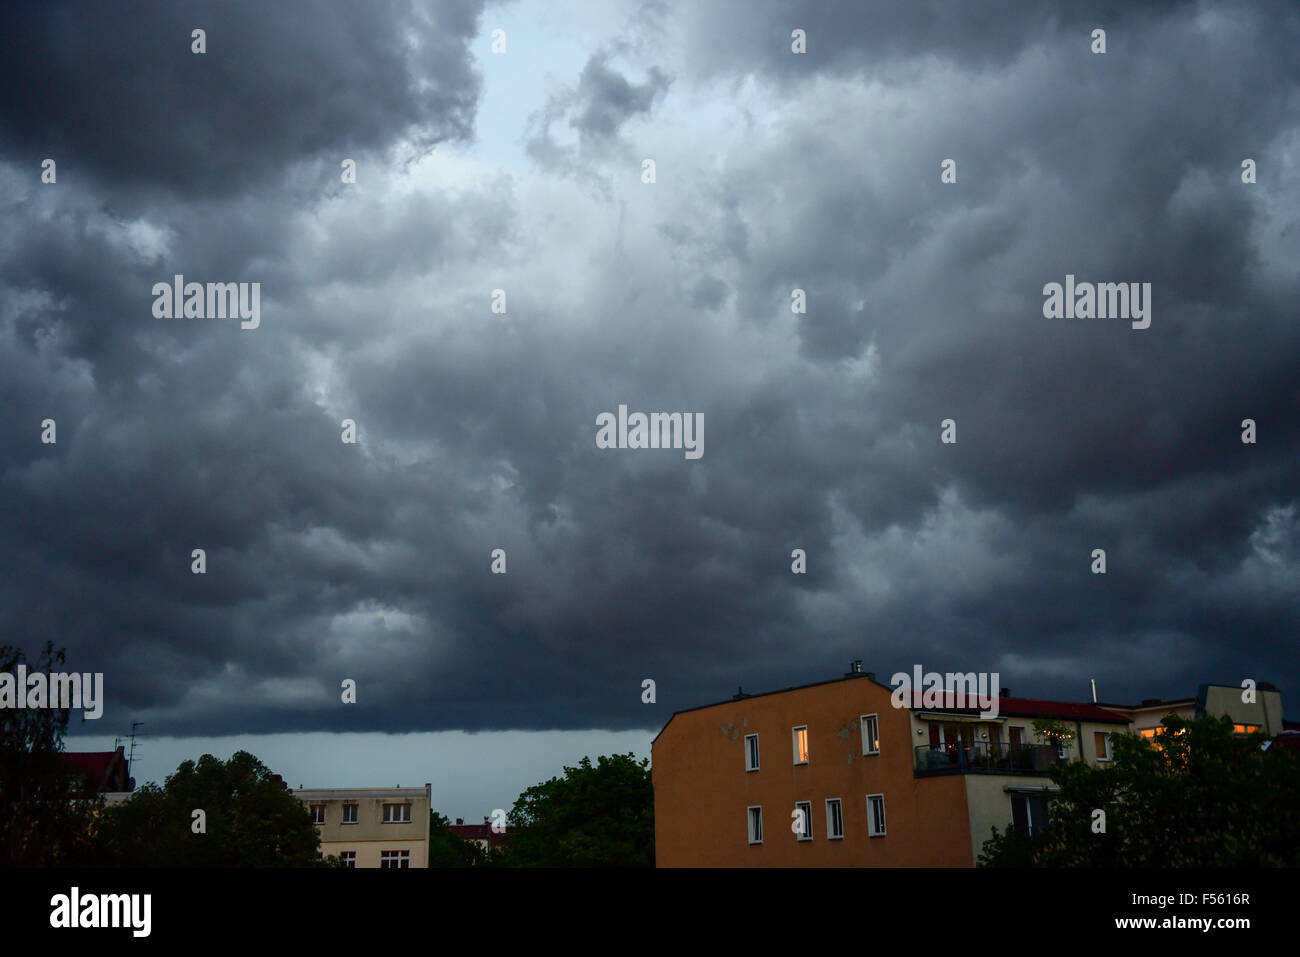 05.05.2015, Berlin, Berlin, Germany  - Storm clouds over Berlin-Prenzlauer Berg. 00Y150505D055CAROEX.JPG - NOT for SALE in G E R M A N Y, A U S T R I A, S W I T Z E R L A N D [MODEL RELEASE: NOT APPLICABLE, PROPERTY RELEASE: NO (c) caro photo agency / Teich, http://www.caro-images.pl, info@carofoto.pl - In case of using the picture for non-journalistic purposes, please contact the agency - the picture is subject to royalty!] Stock Photo